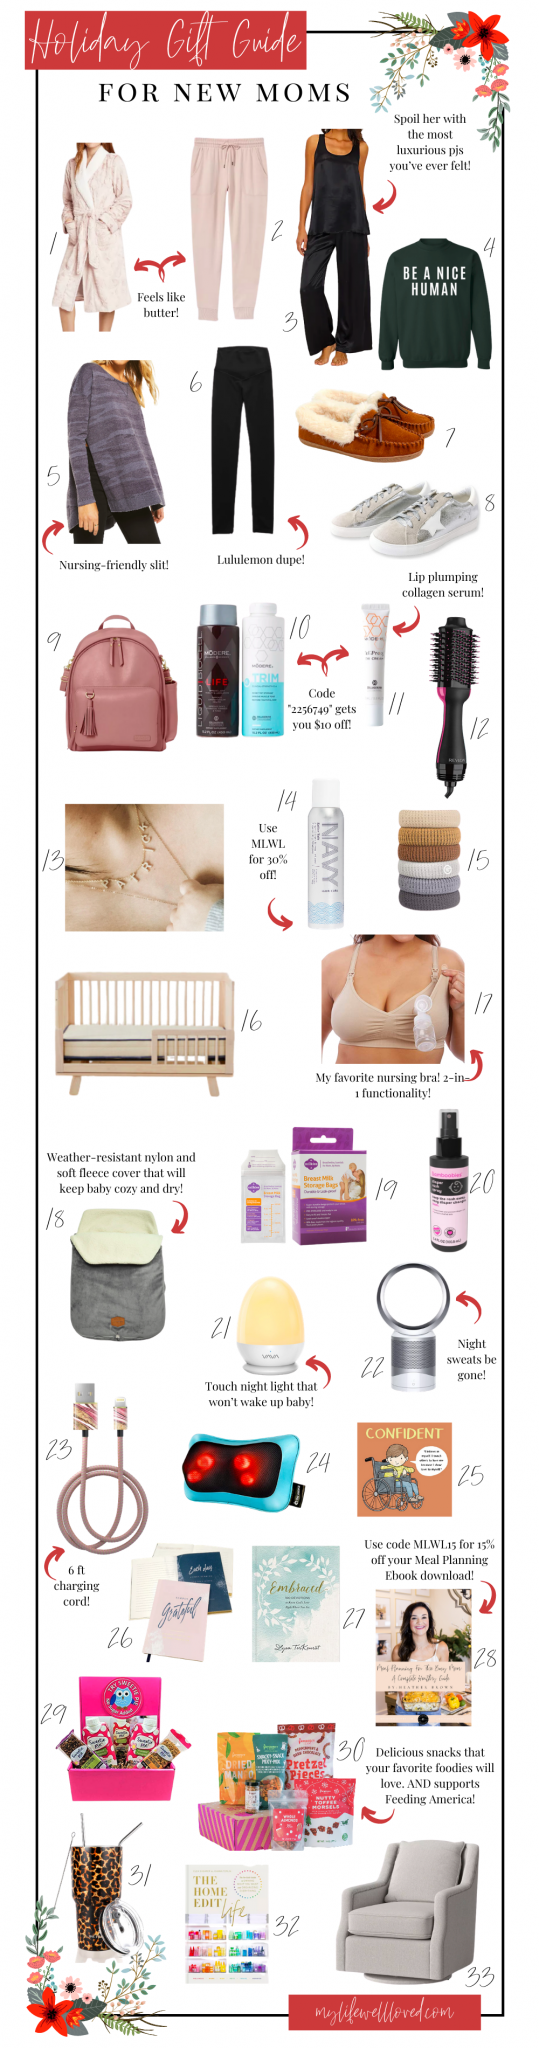 Gifts For The New Mom - Makeup by Ana B